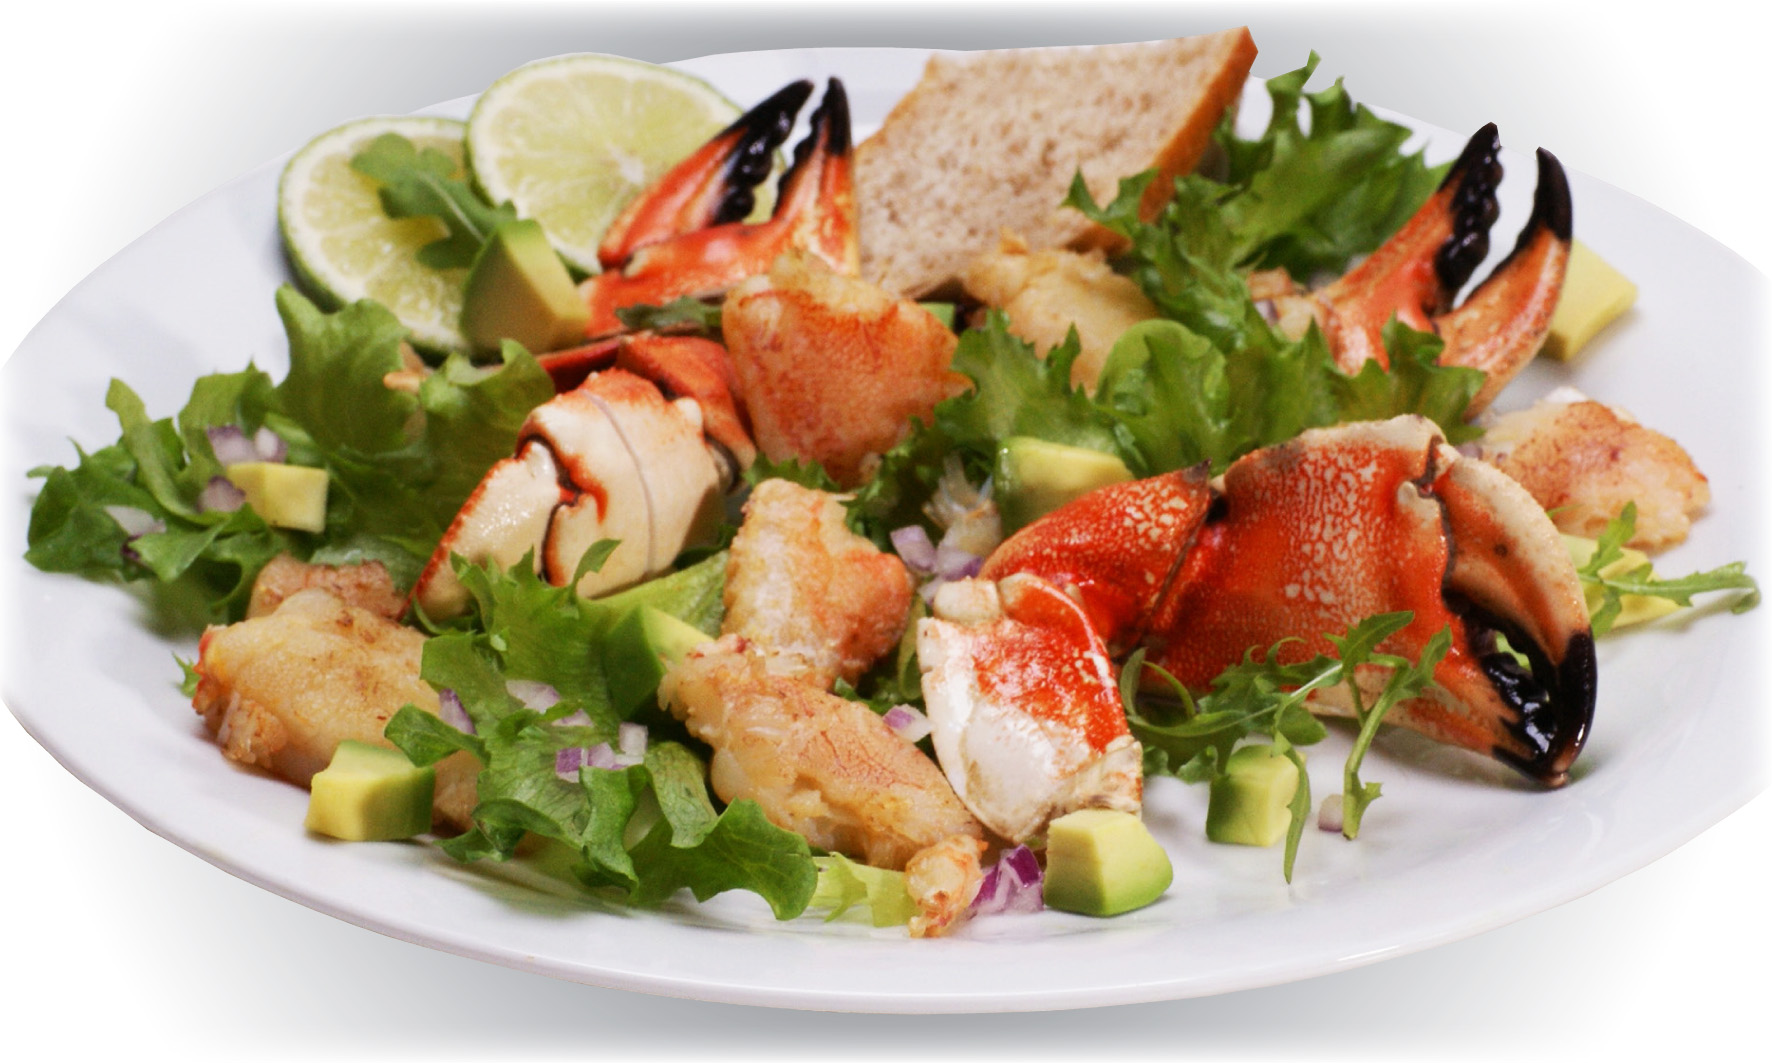 Recipes Salad with Jonah crab claws